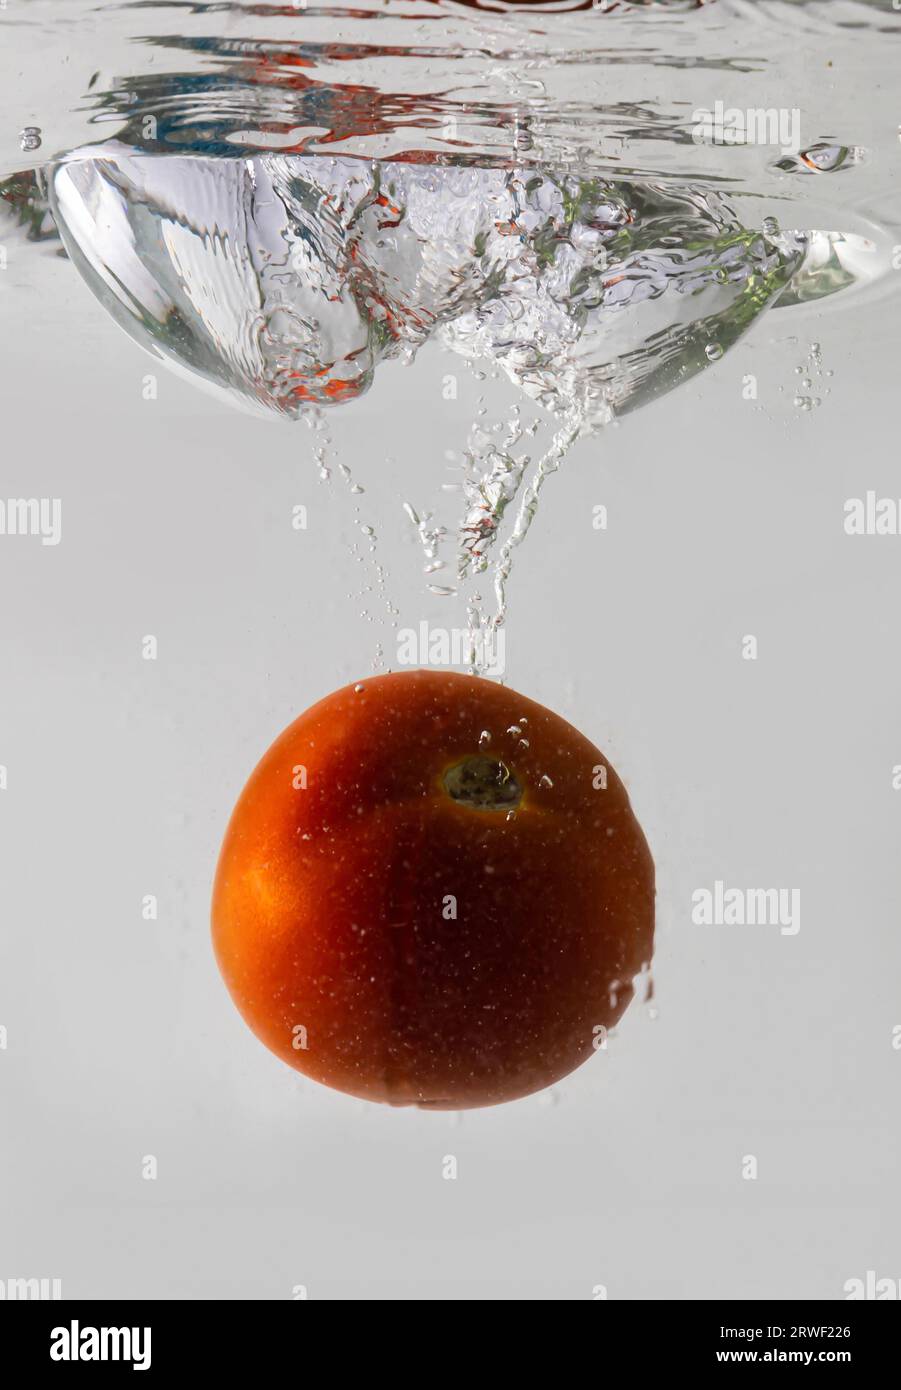 Ripe tomato falls deeply under water with a big splash. Stock Photo